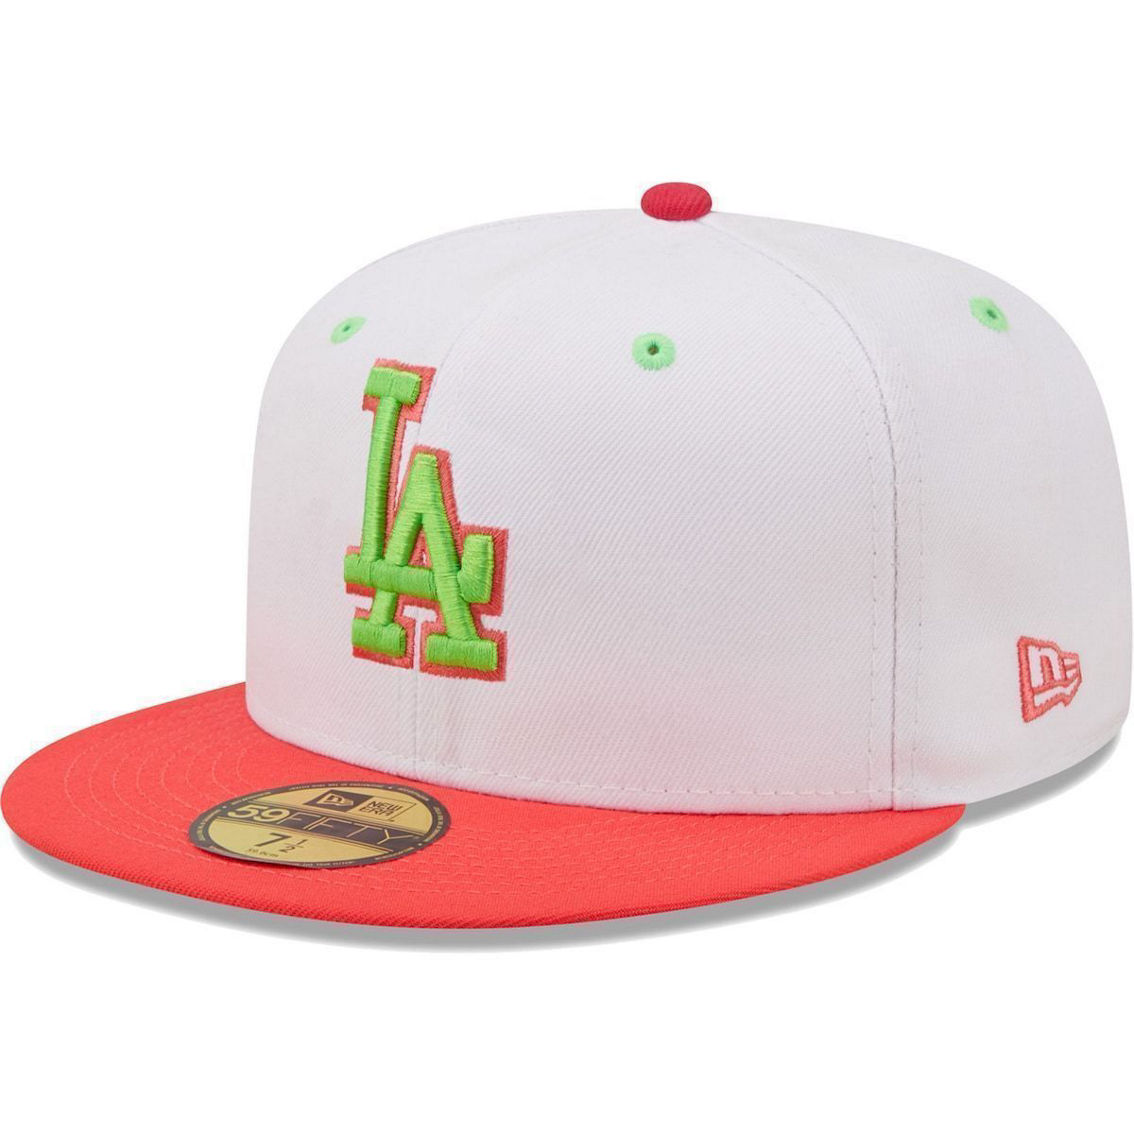 New Era Men's White/Coral Los Angeles Dodgers 100th Anniversary Strawberry Lolli 59FIFTY Fitted Hat - Image 4 of 4